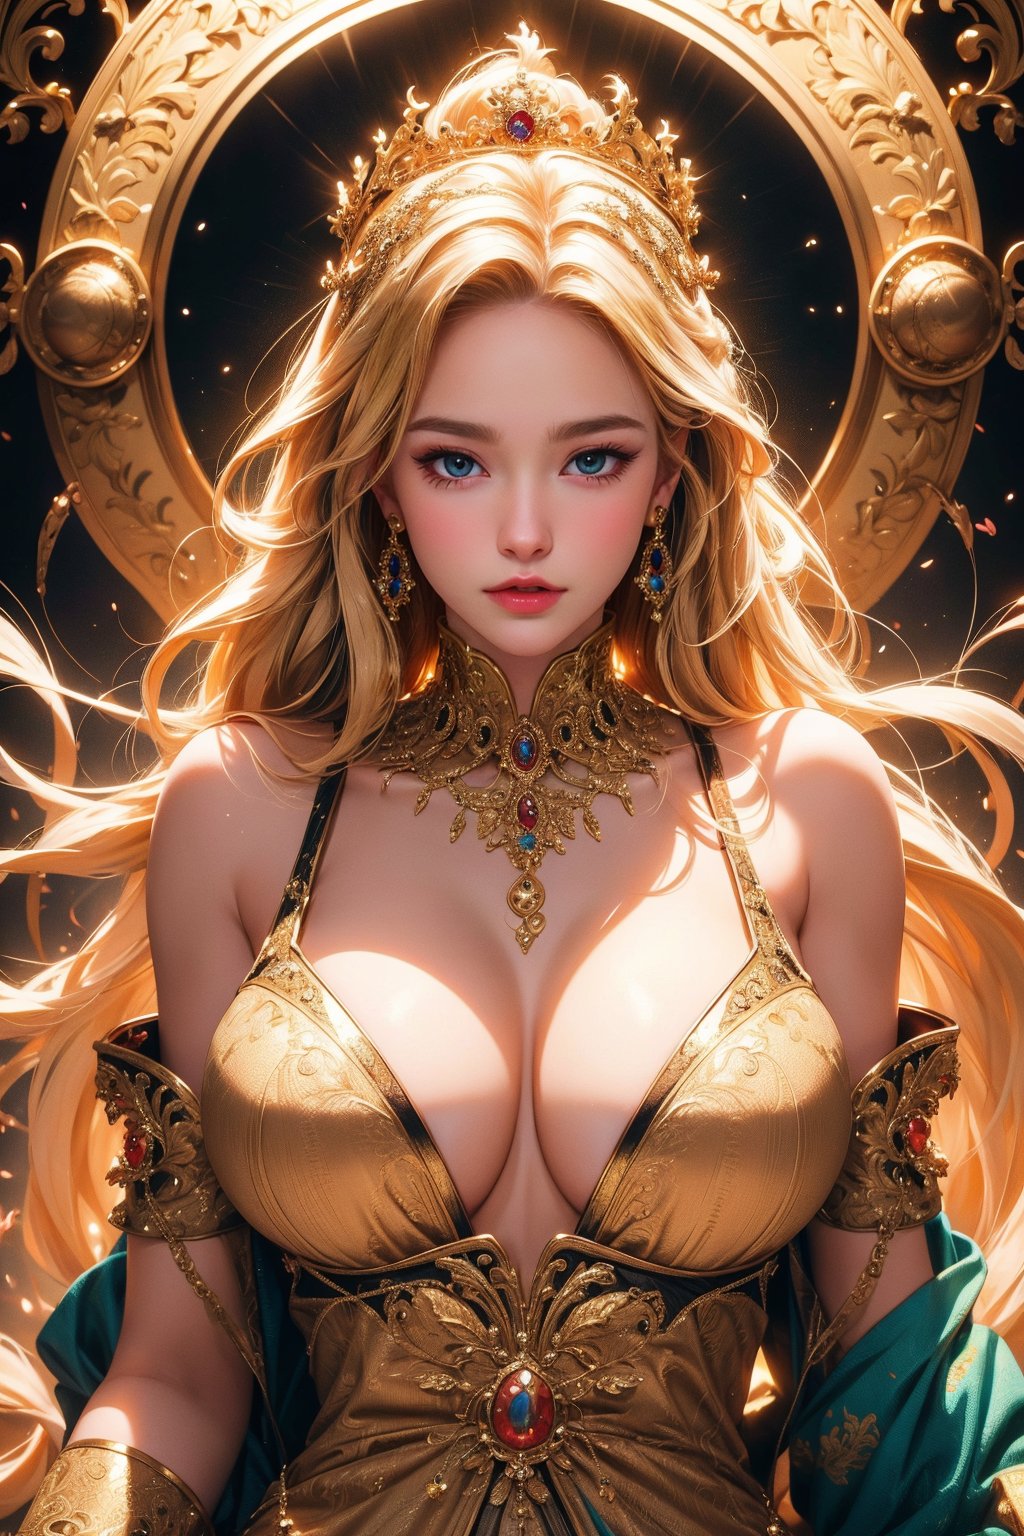 busty and sexy girl, 8k, masterpiece, ultra-realistic, best quality, high resolution, high definition,dressed in an elaborate, ornate costume, CROWN, JEWELRY,blonde,majestic aura,The costume is richly detailed with gold and dark tones,The background features decorative circular patterns that radiate outward,There is a glow around the figure, which gives an ethereal feel to the image